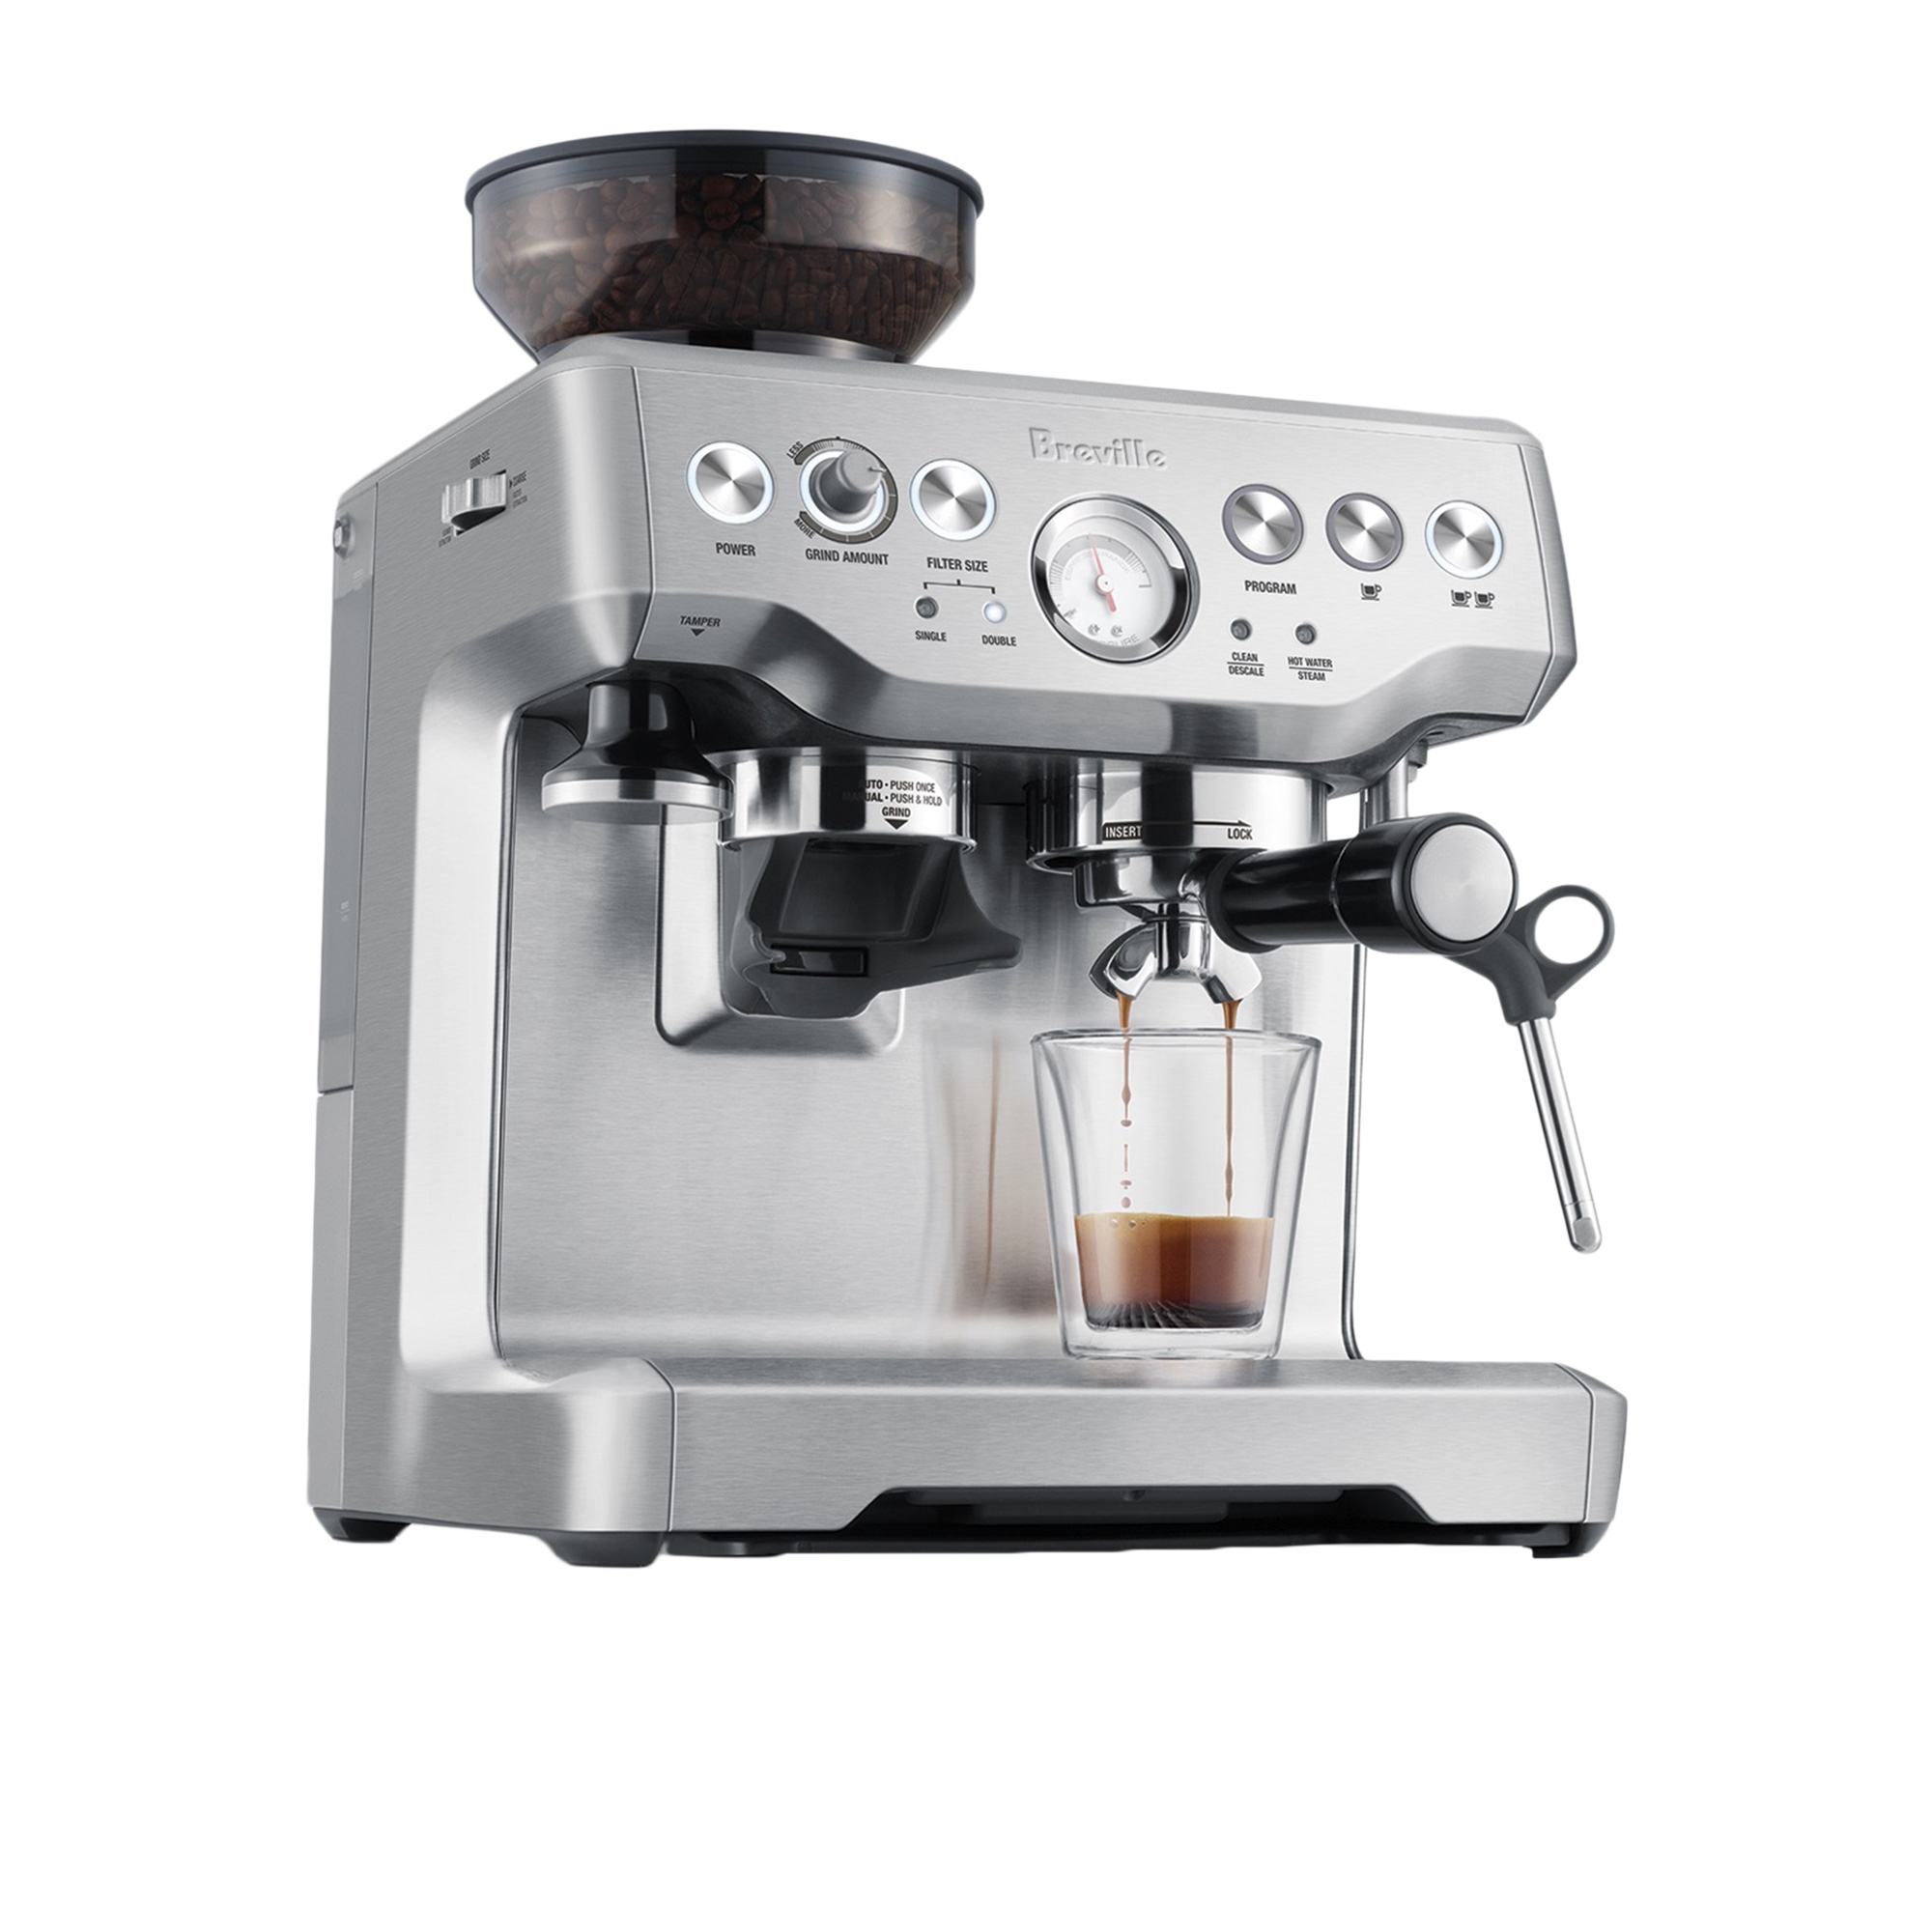 Breville The Barista Express Espresso Machine Brushed Stainless Steel Image 2